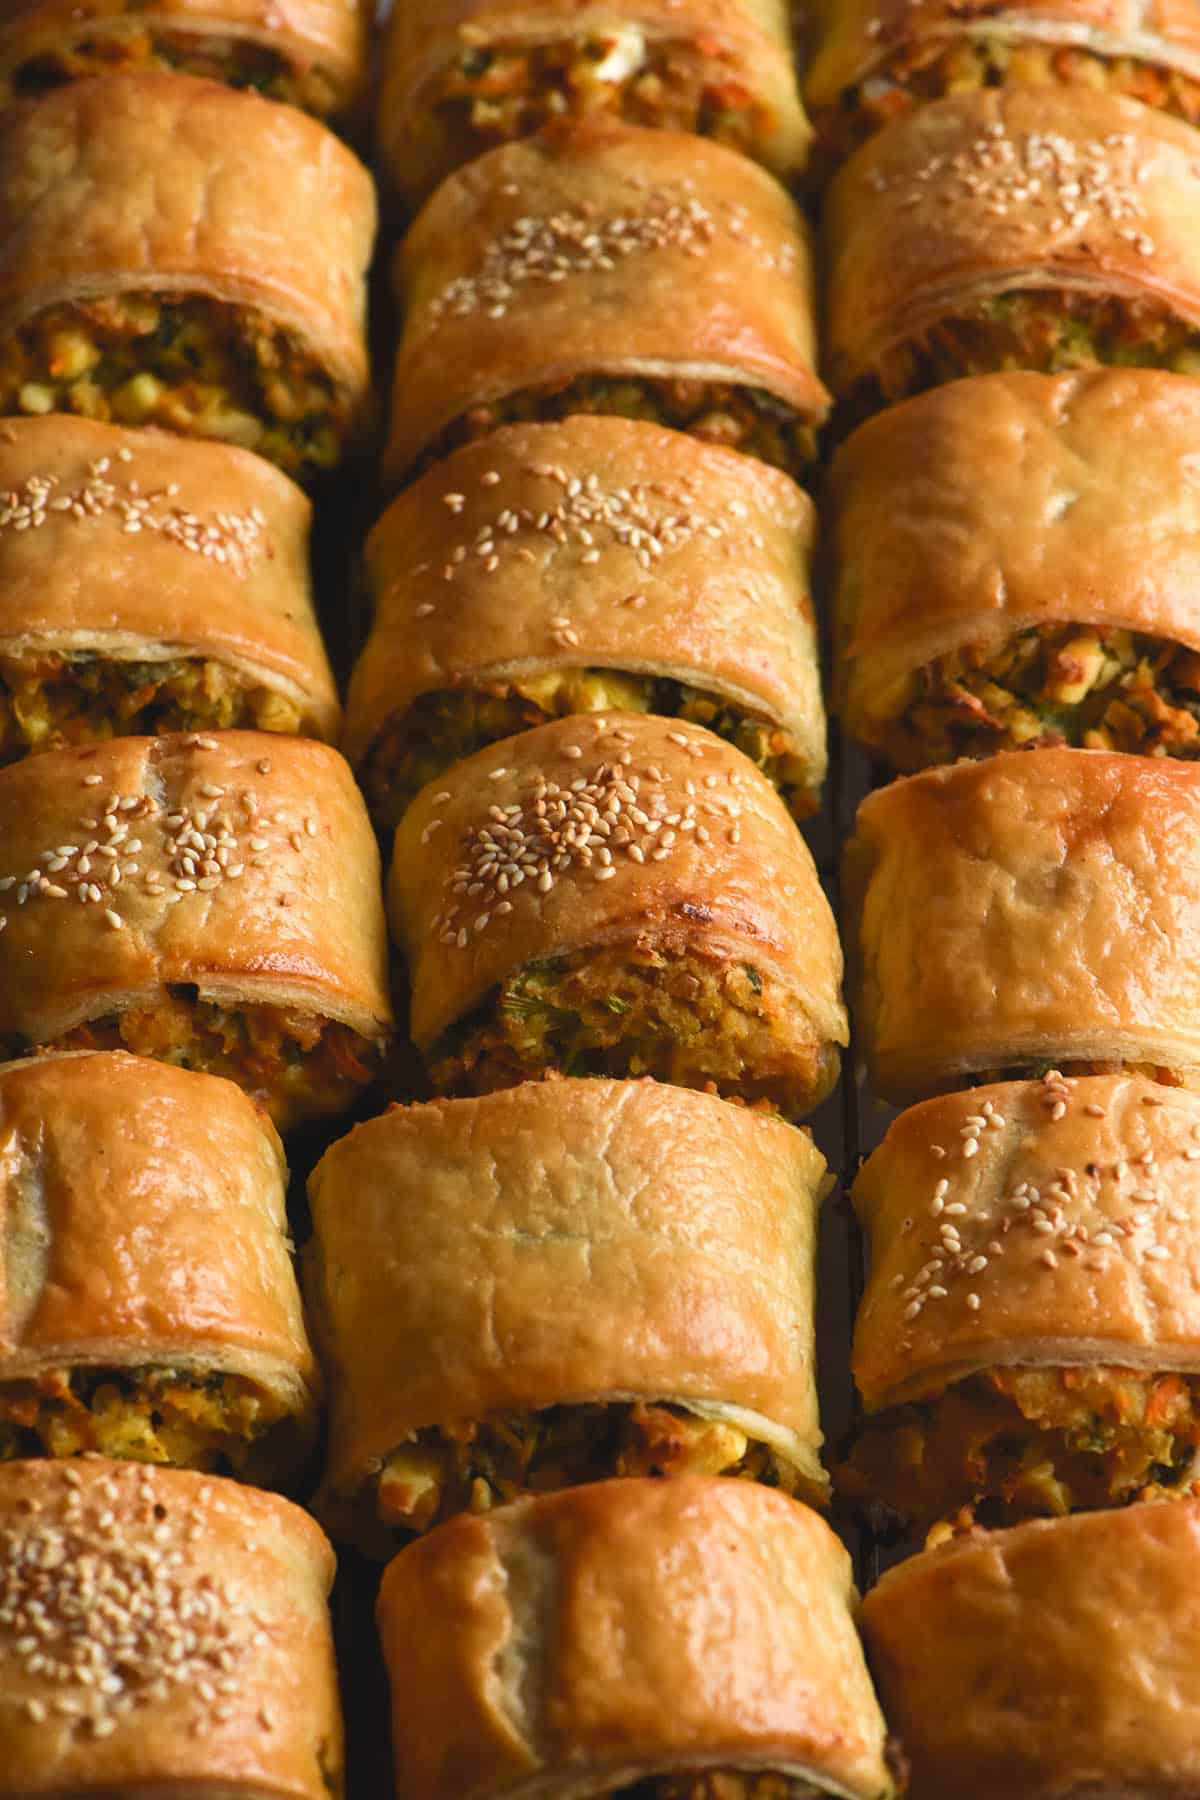 An aerial, close up view of rows of gluten free chickpea, vegetable and feta sausage rolls. The rolls are golden brown and topped with toasted sesame seeds. They hug each other tightly so no background can be seen underneath